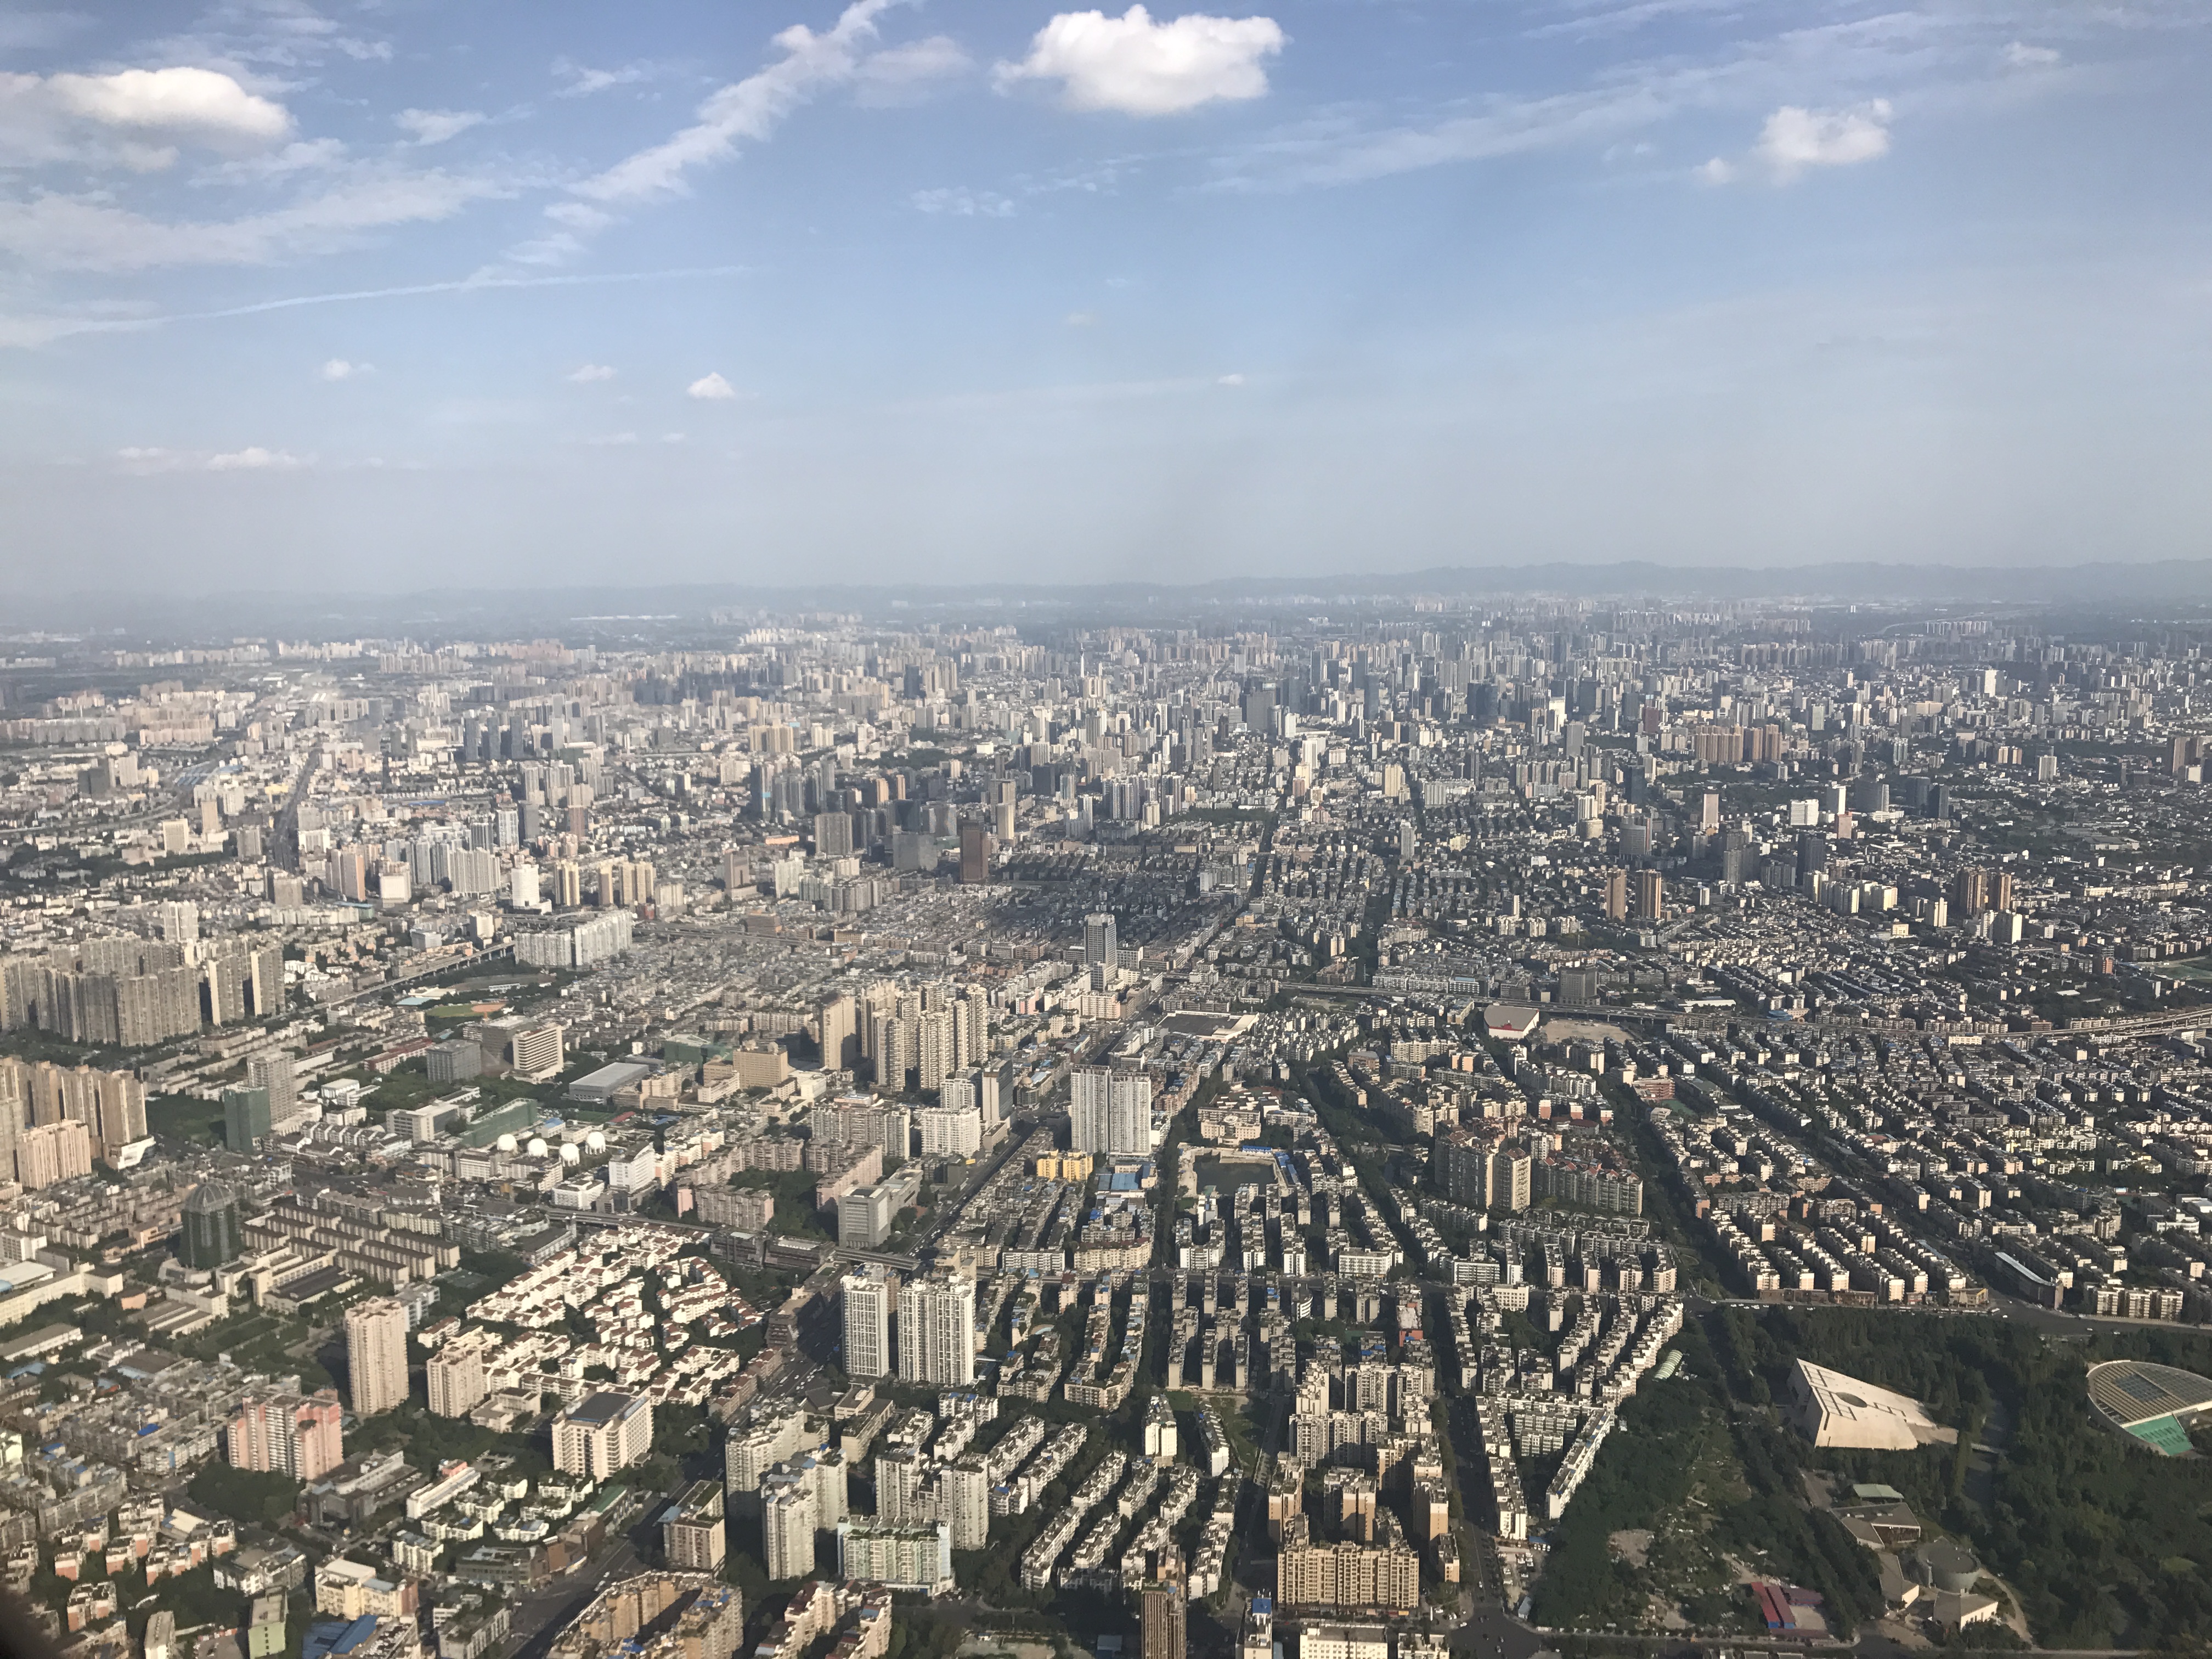 A view from the sky shows the dense, expansive growth in just one part of the megacity of Chengdu, China. It is in response to this growth, the Chinese government is interested in introducing a bond market to help fund massive infrastructure projects.